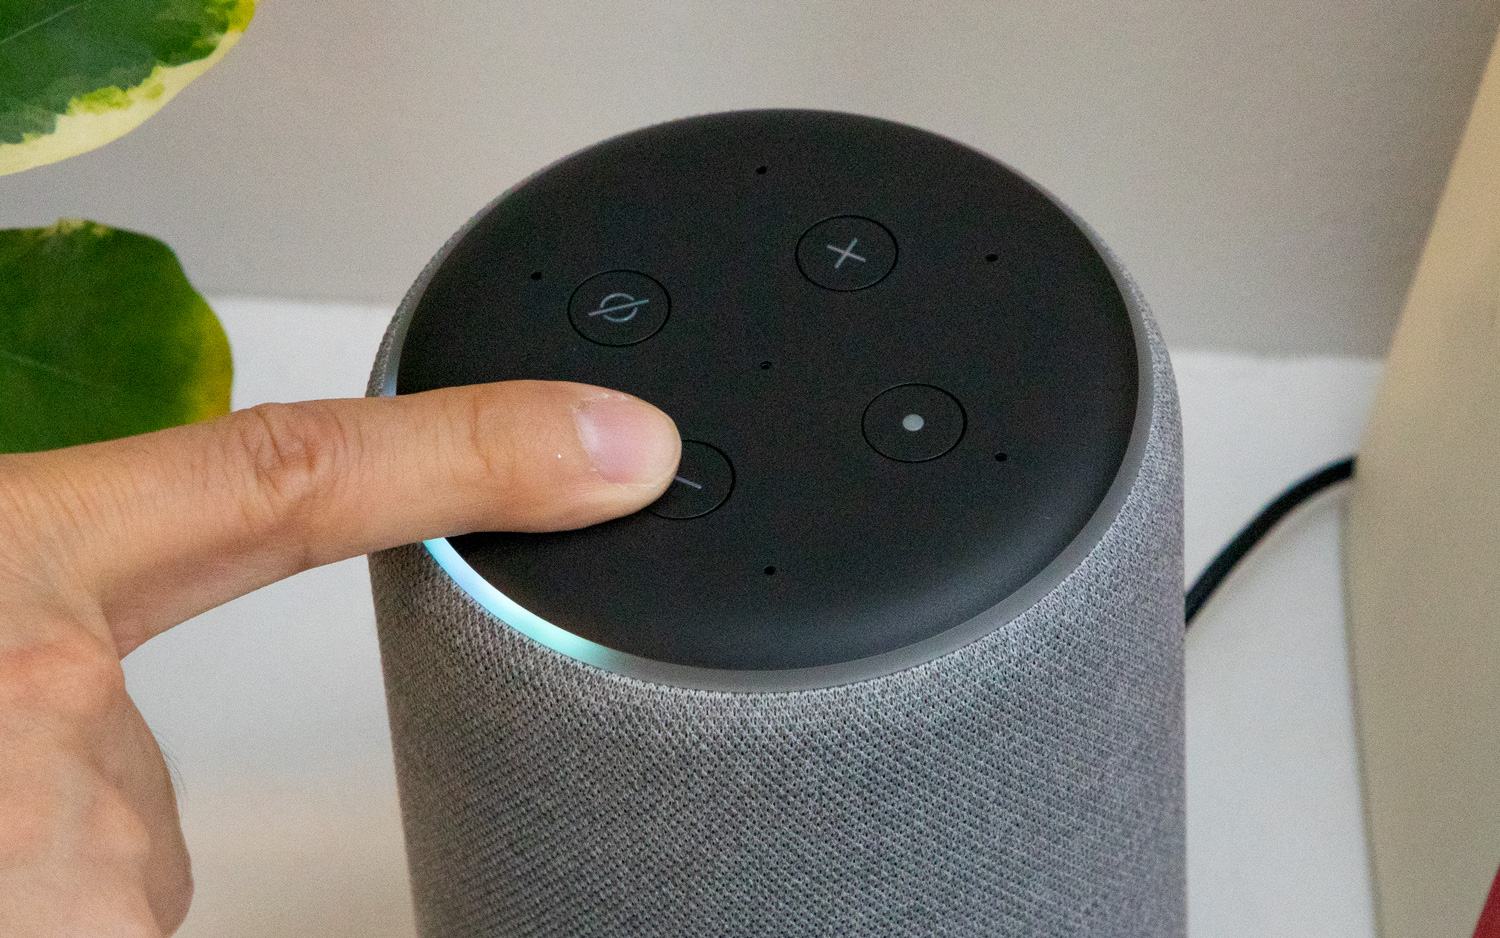 How to play music on alexa for free